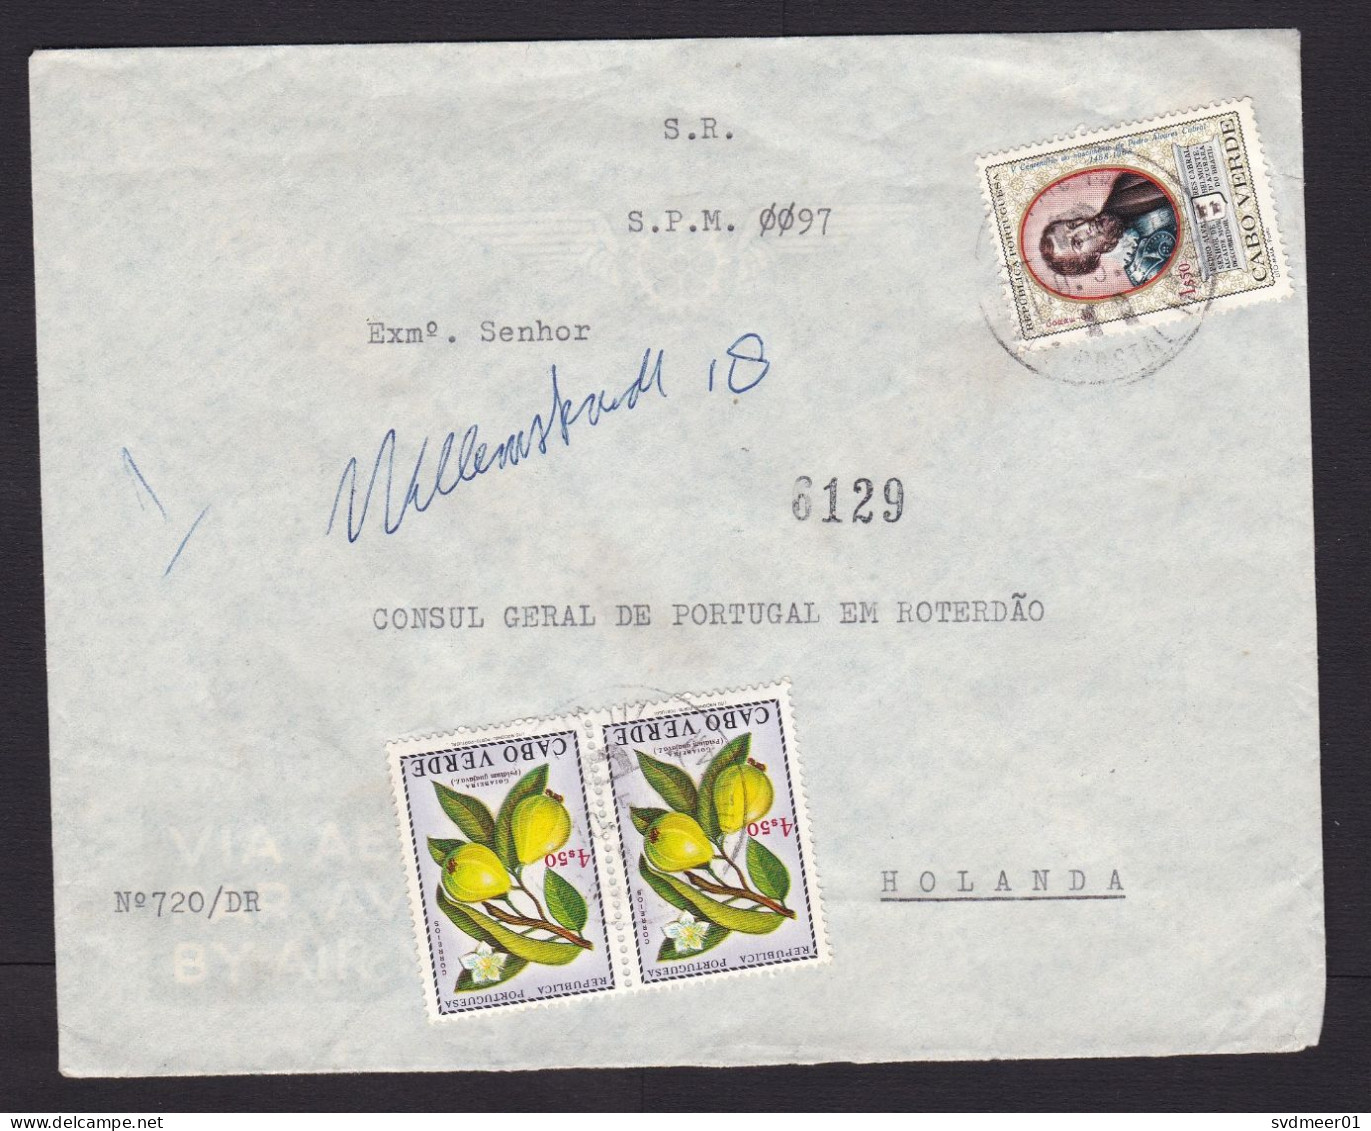 Cabo Verde: Cover To Netherlands, 1973, 3 Stamps, Fruit, History, To Consulate, No Address, Written Note (discolouring) - Cap Vert